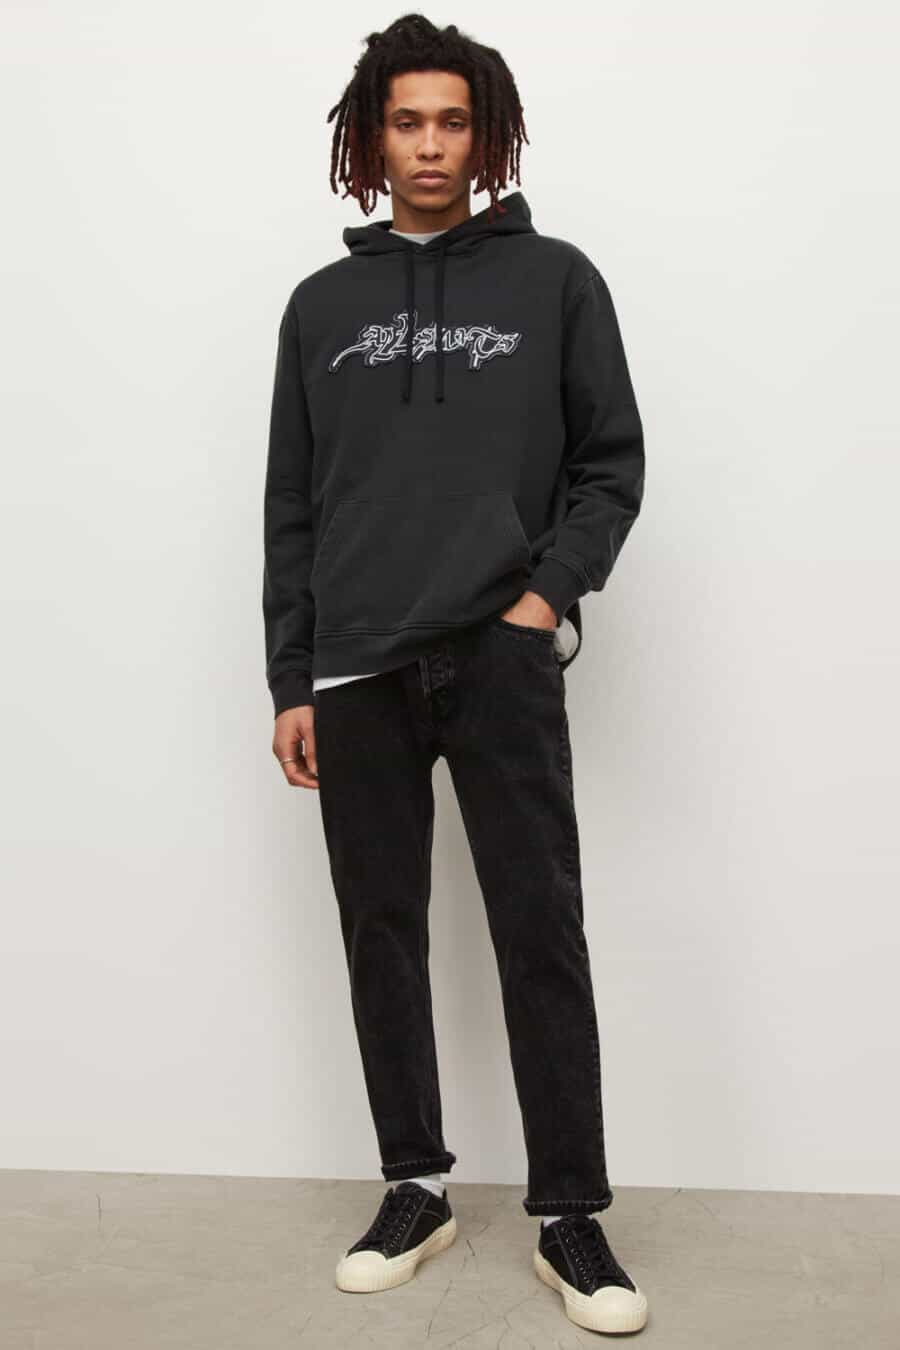 Men's black jeans, canvas sneakers and black hoodie outfit